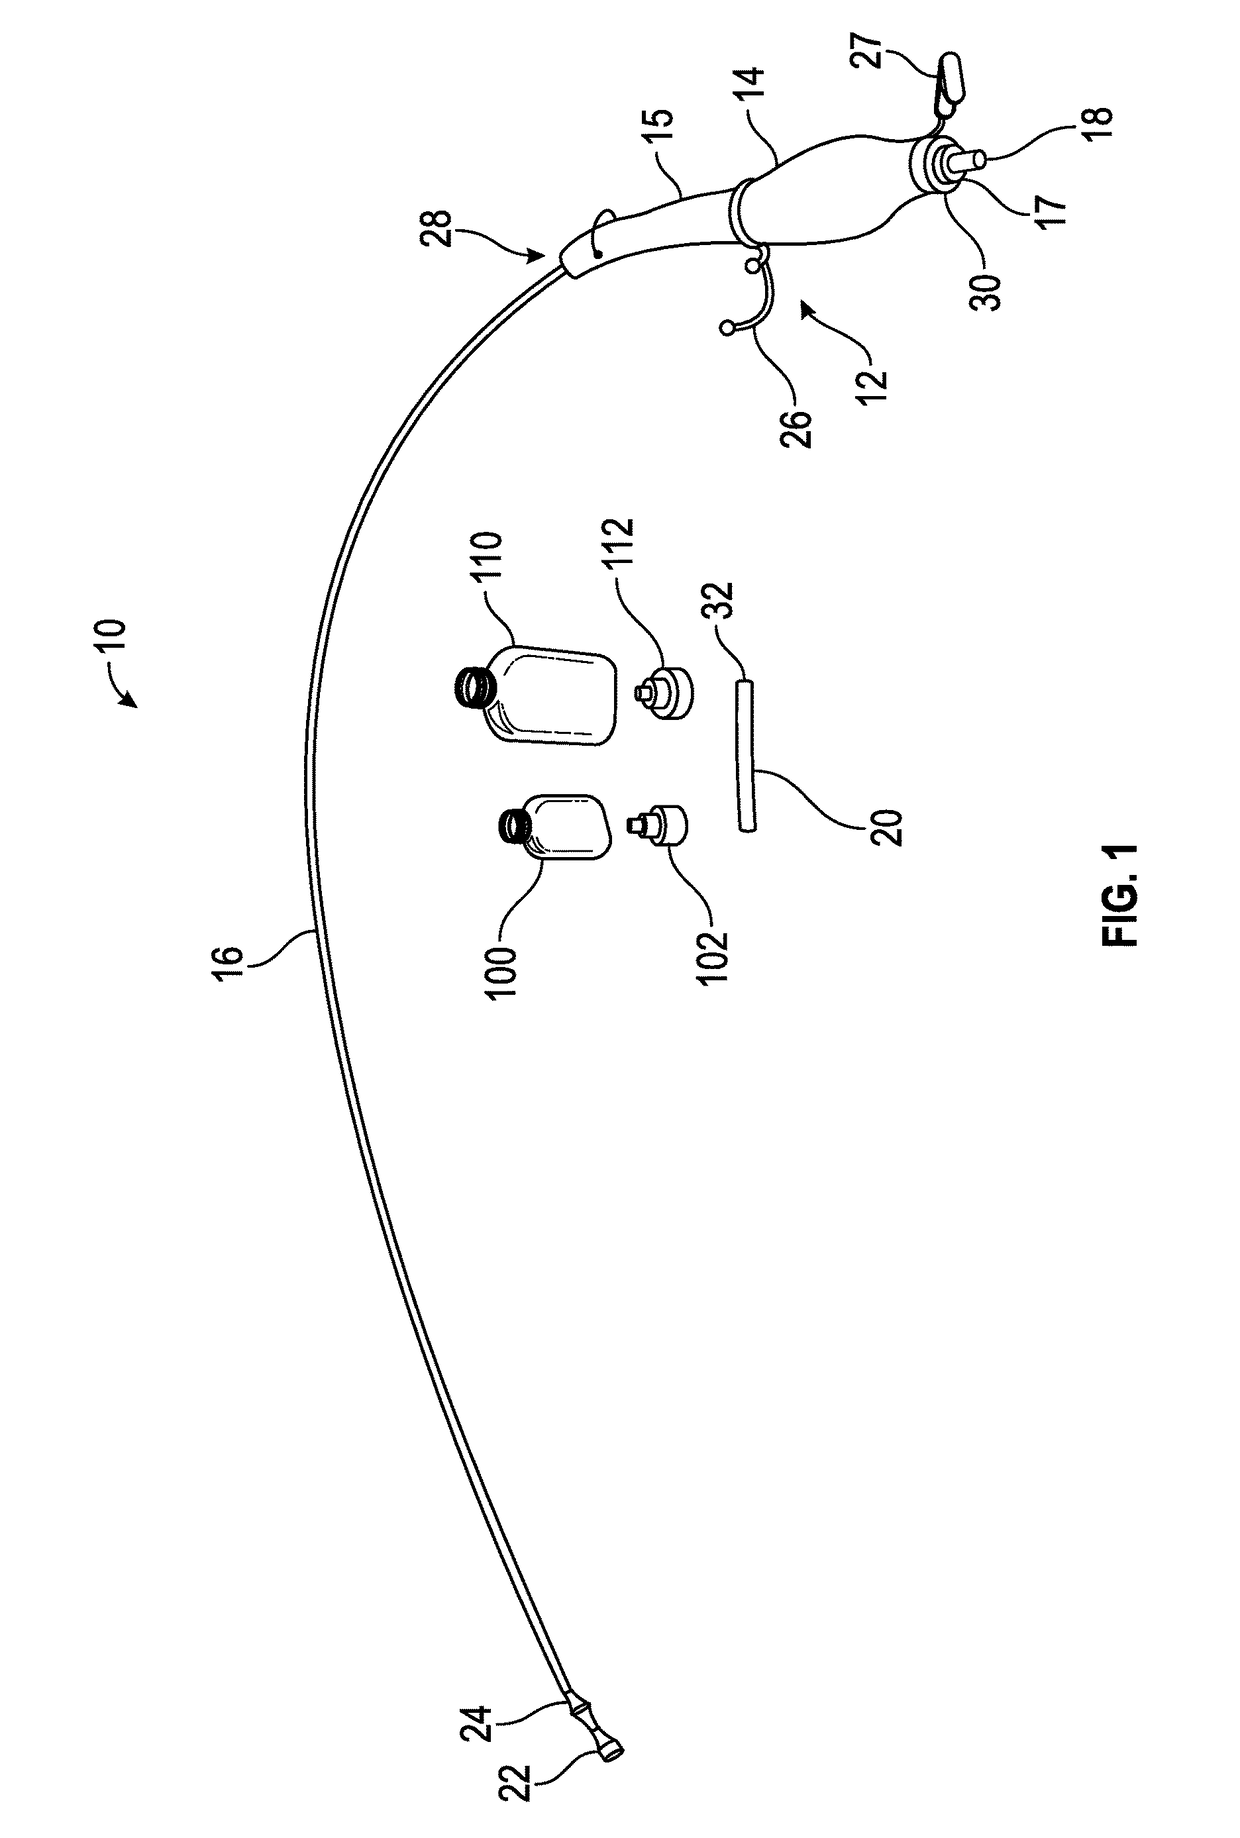 Scent dispensing system and apparatus